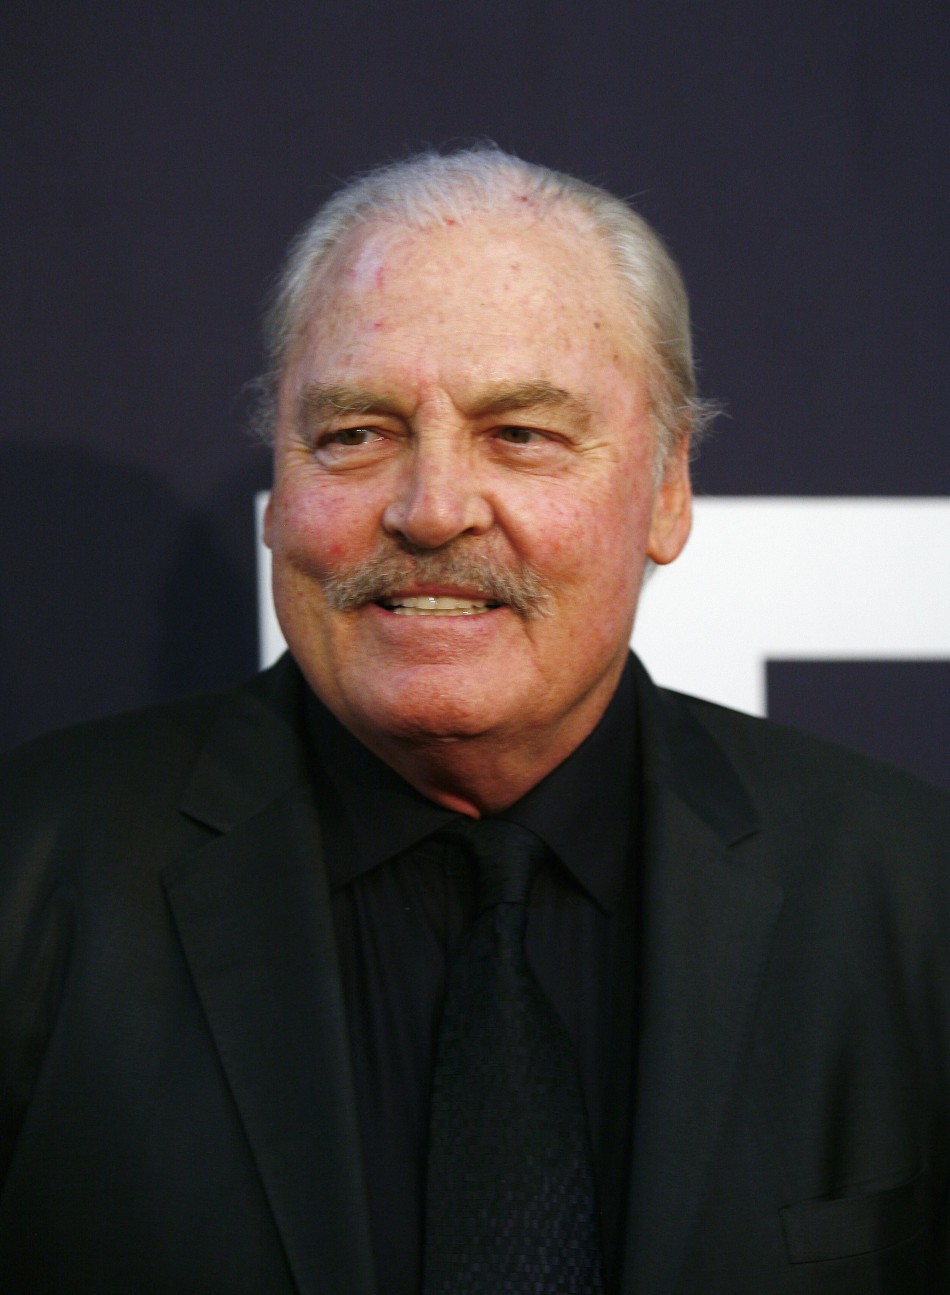 Cast member Keach attends the premiere of the film quotThe Bourne Legacyquot in New York